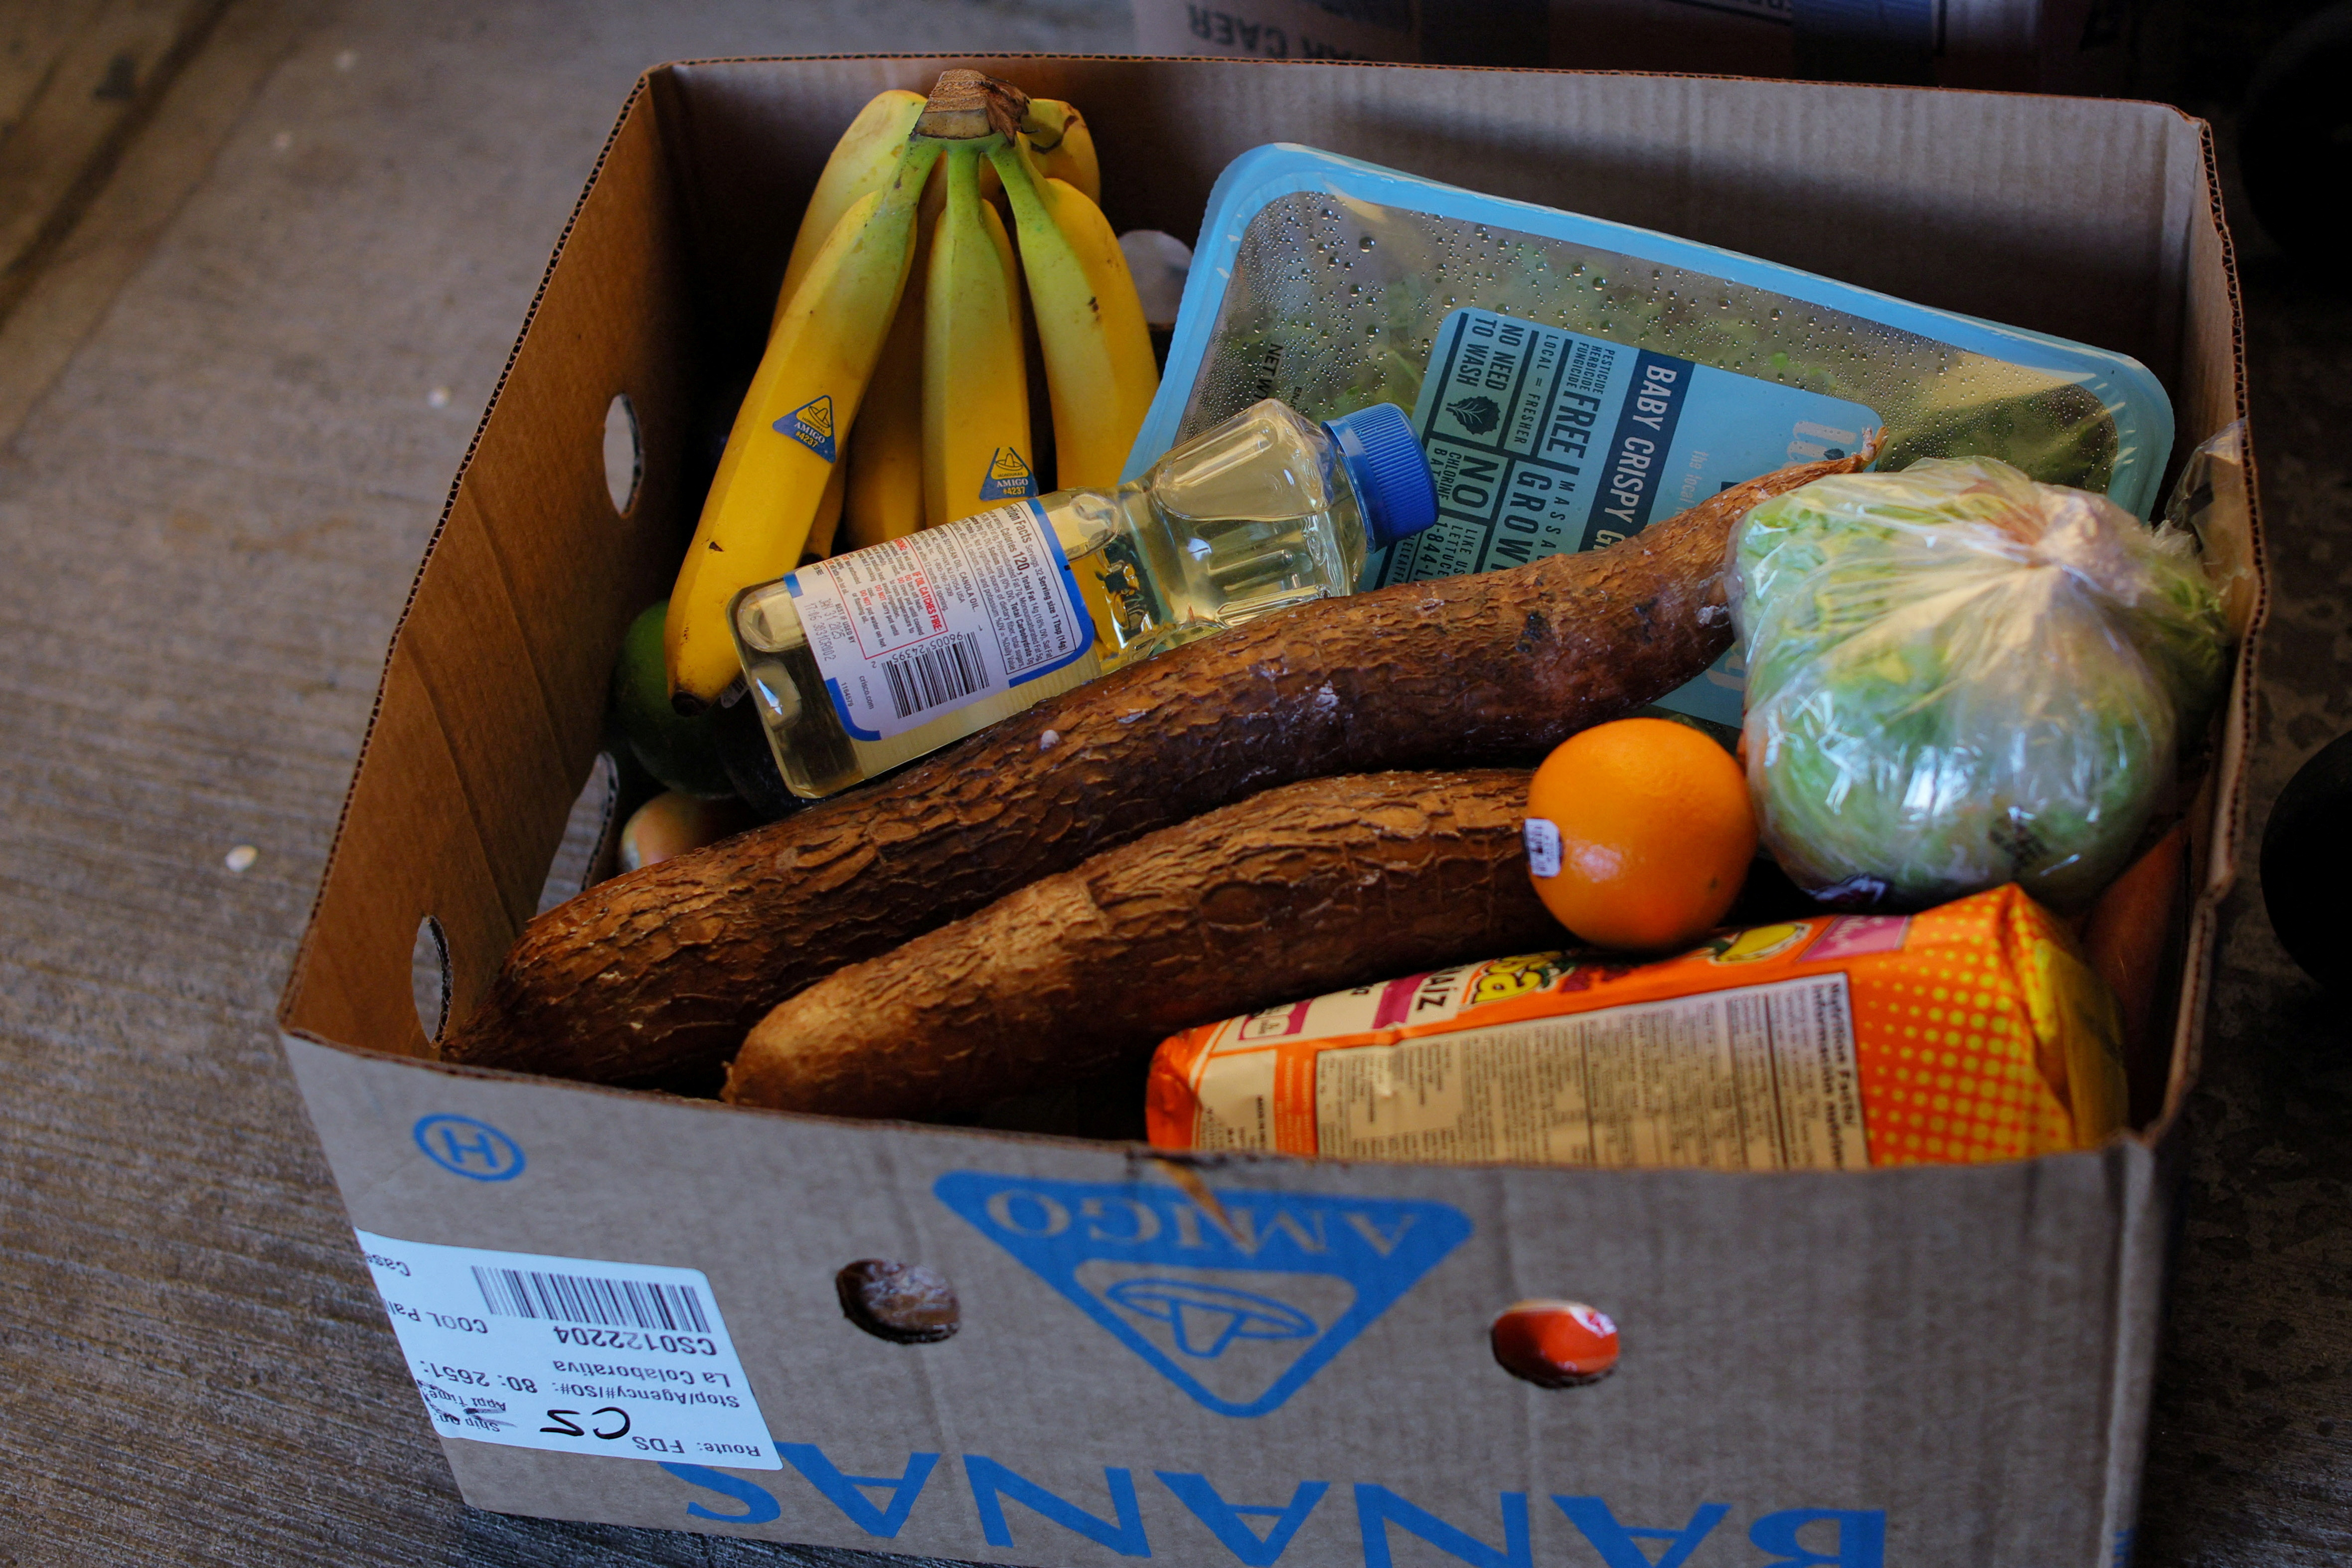 La Colaborativa holds a food pantry in Chelsea